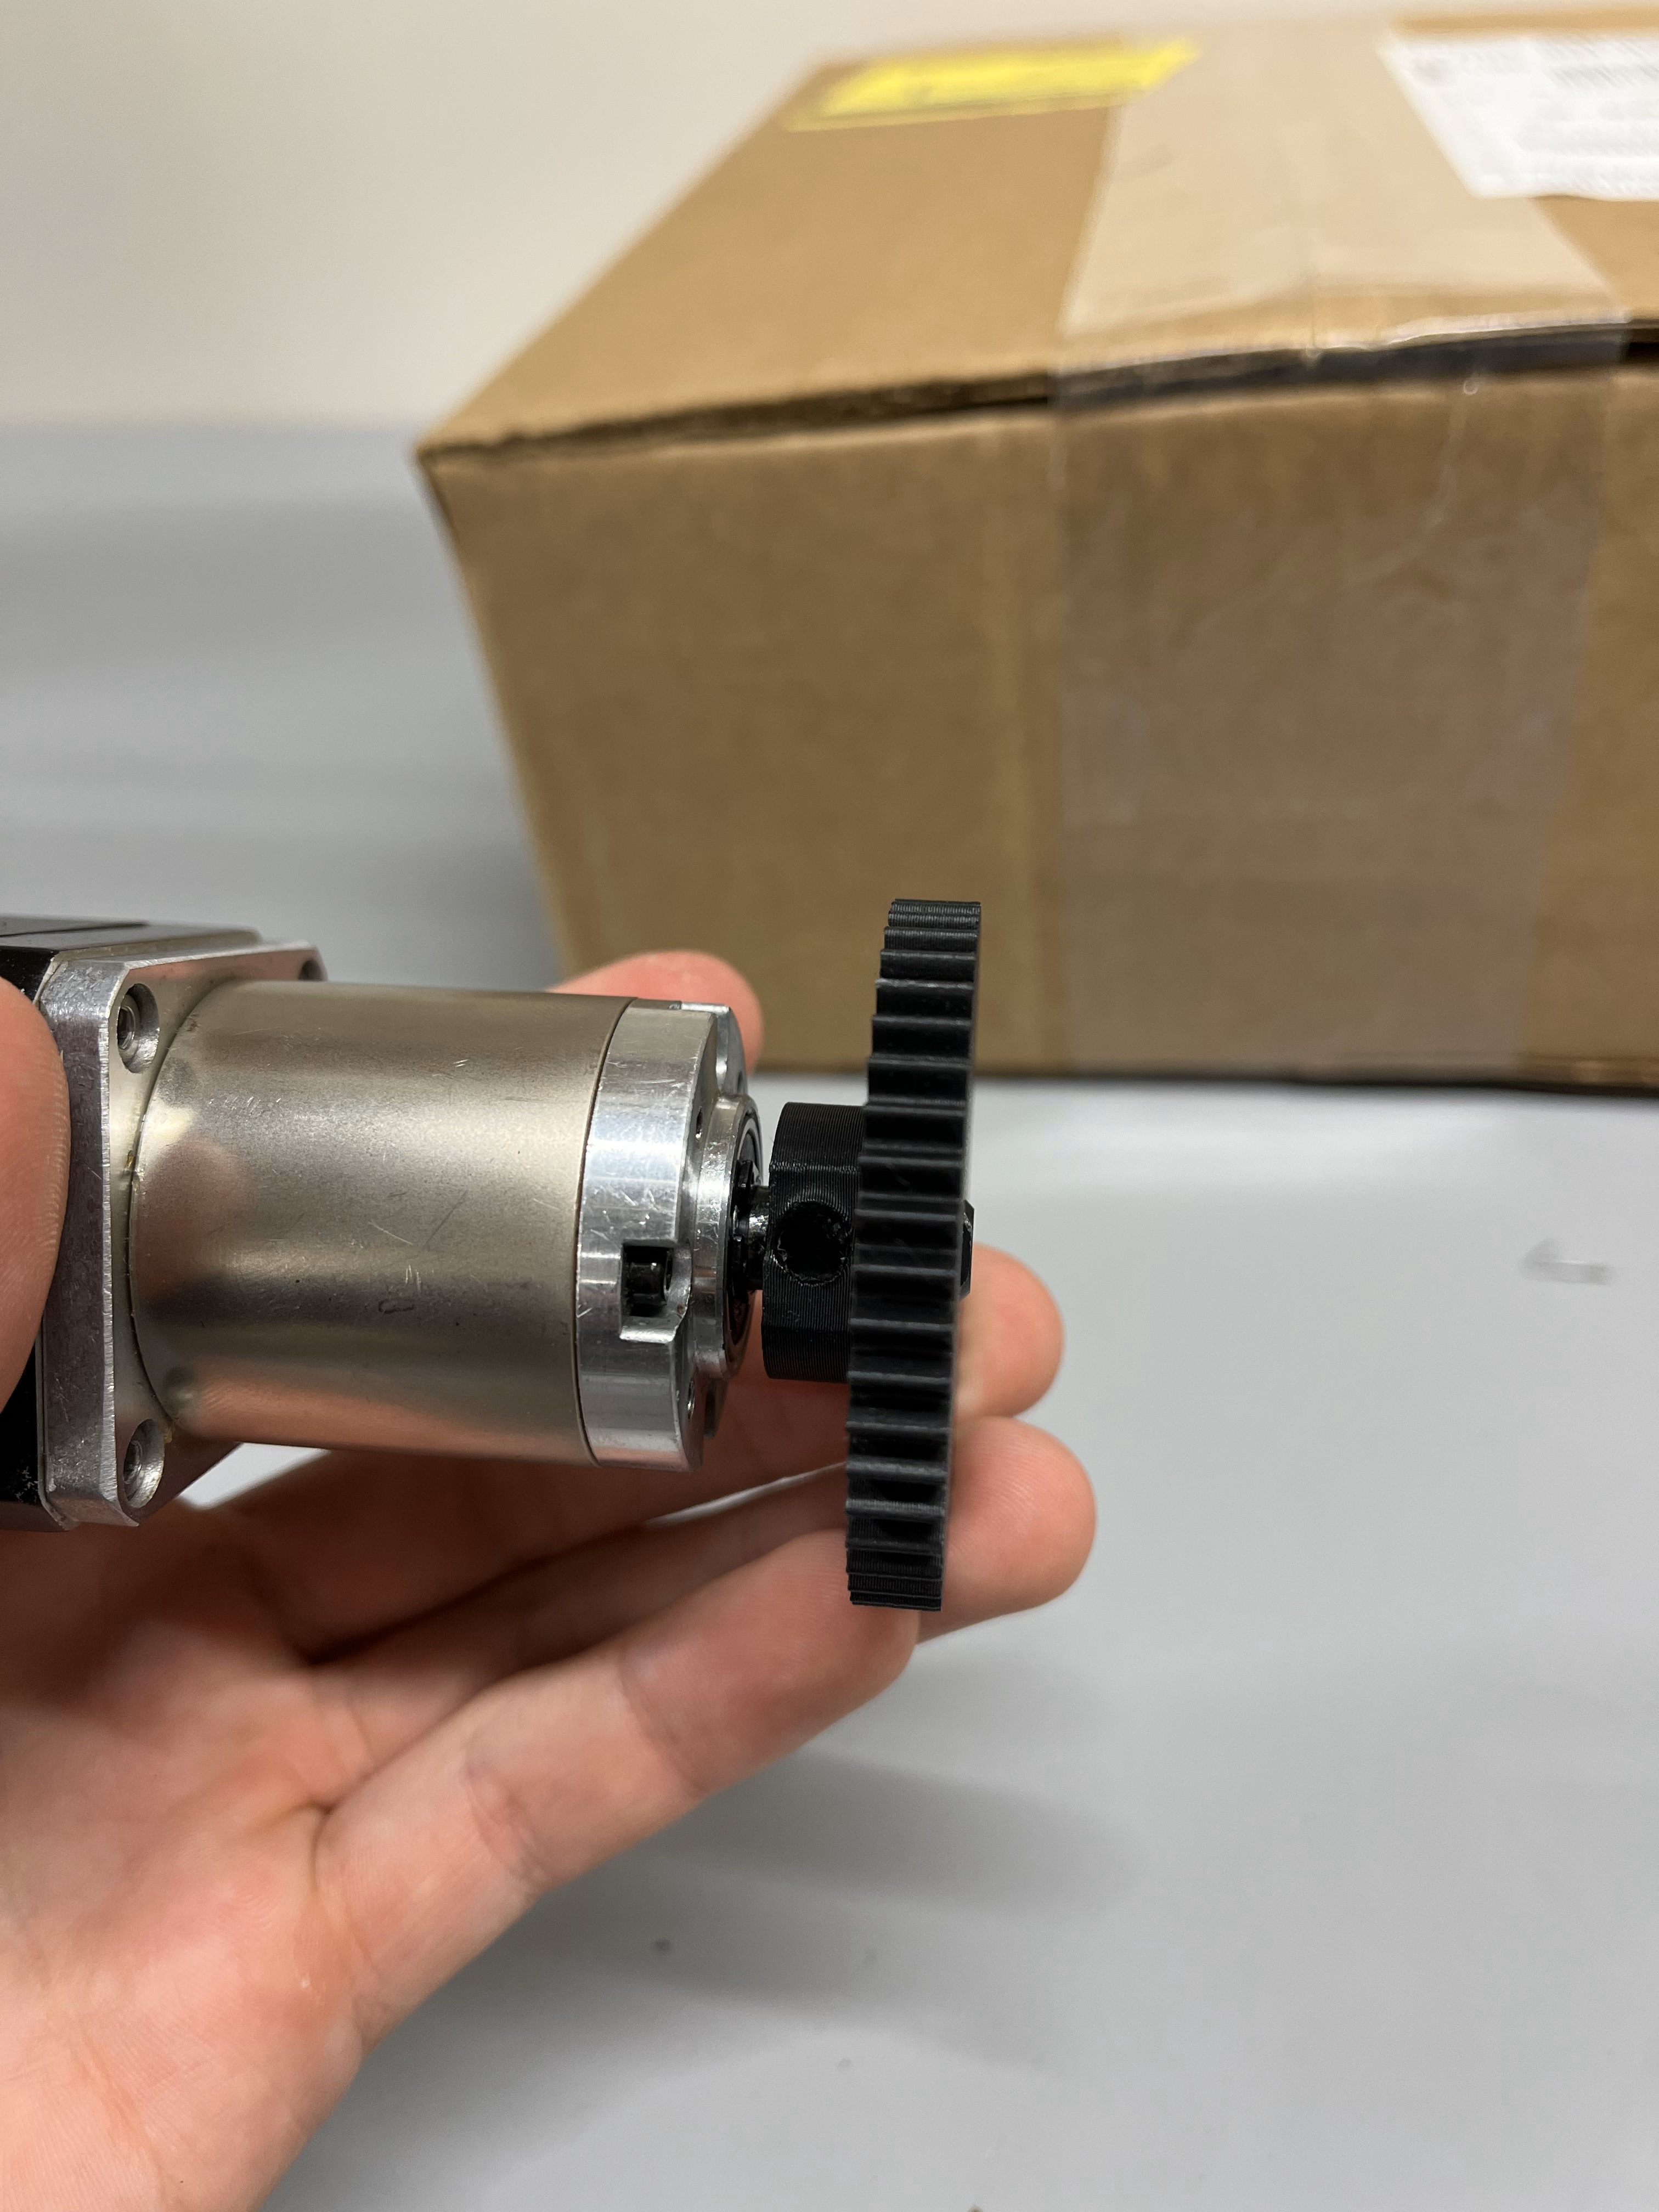 Early Version of Stepper motor 3D printed gear